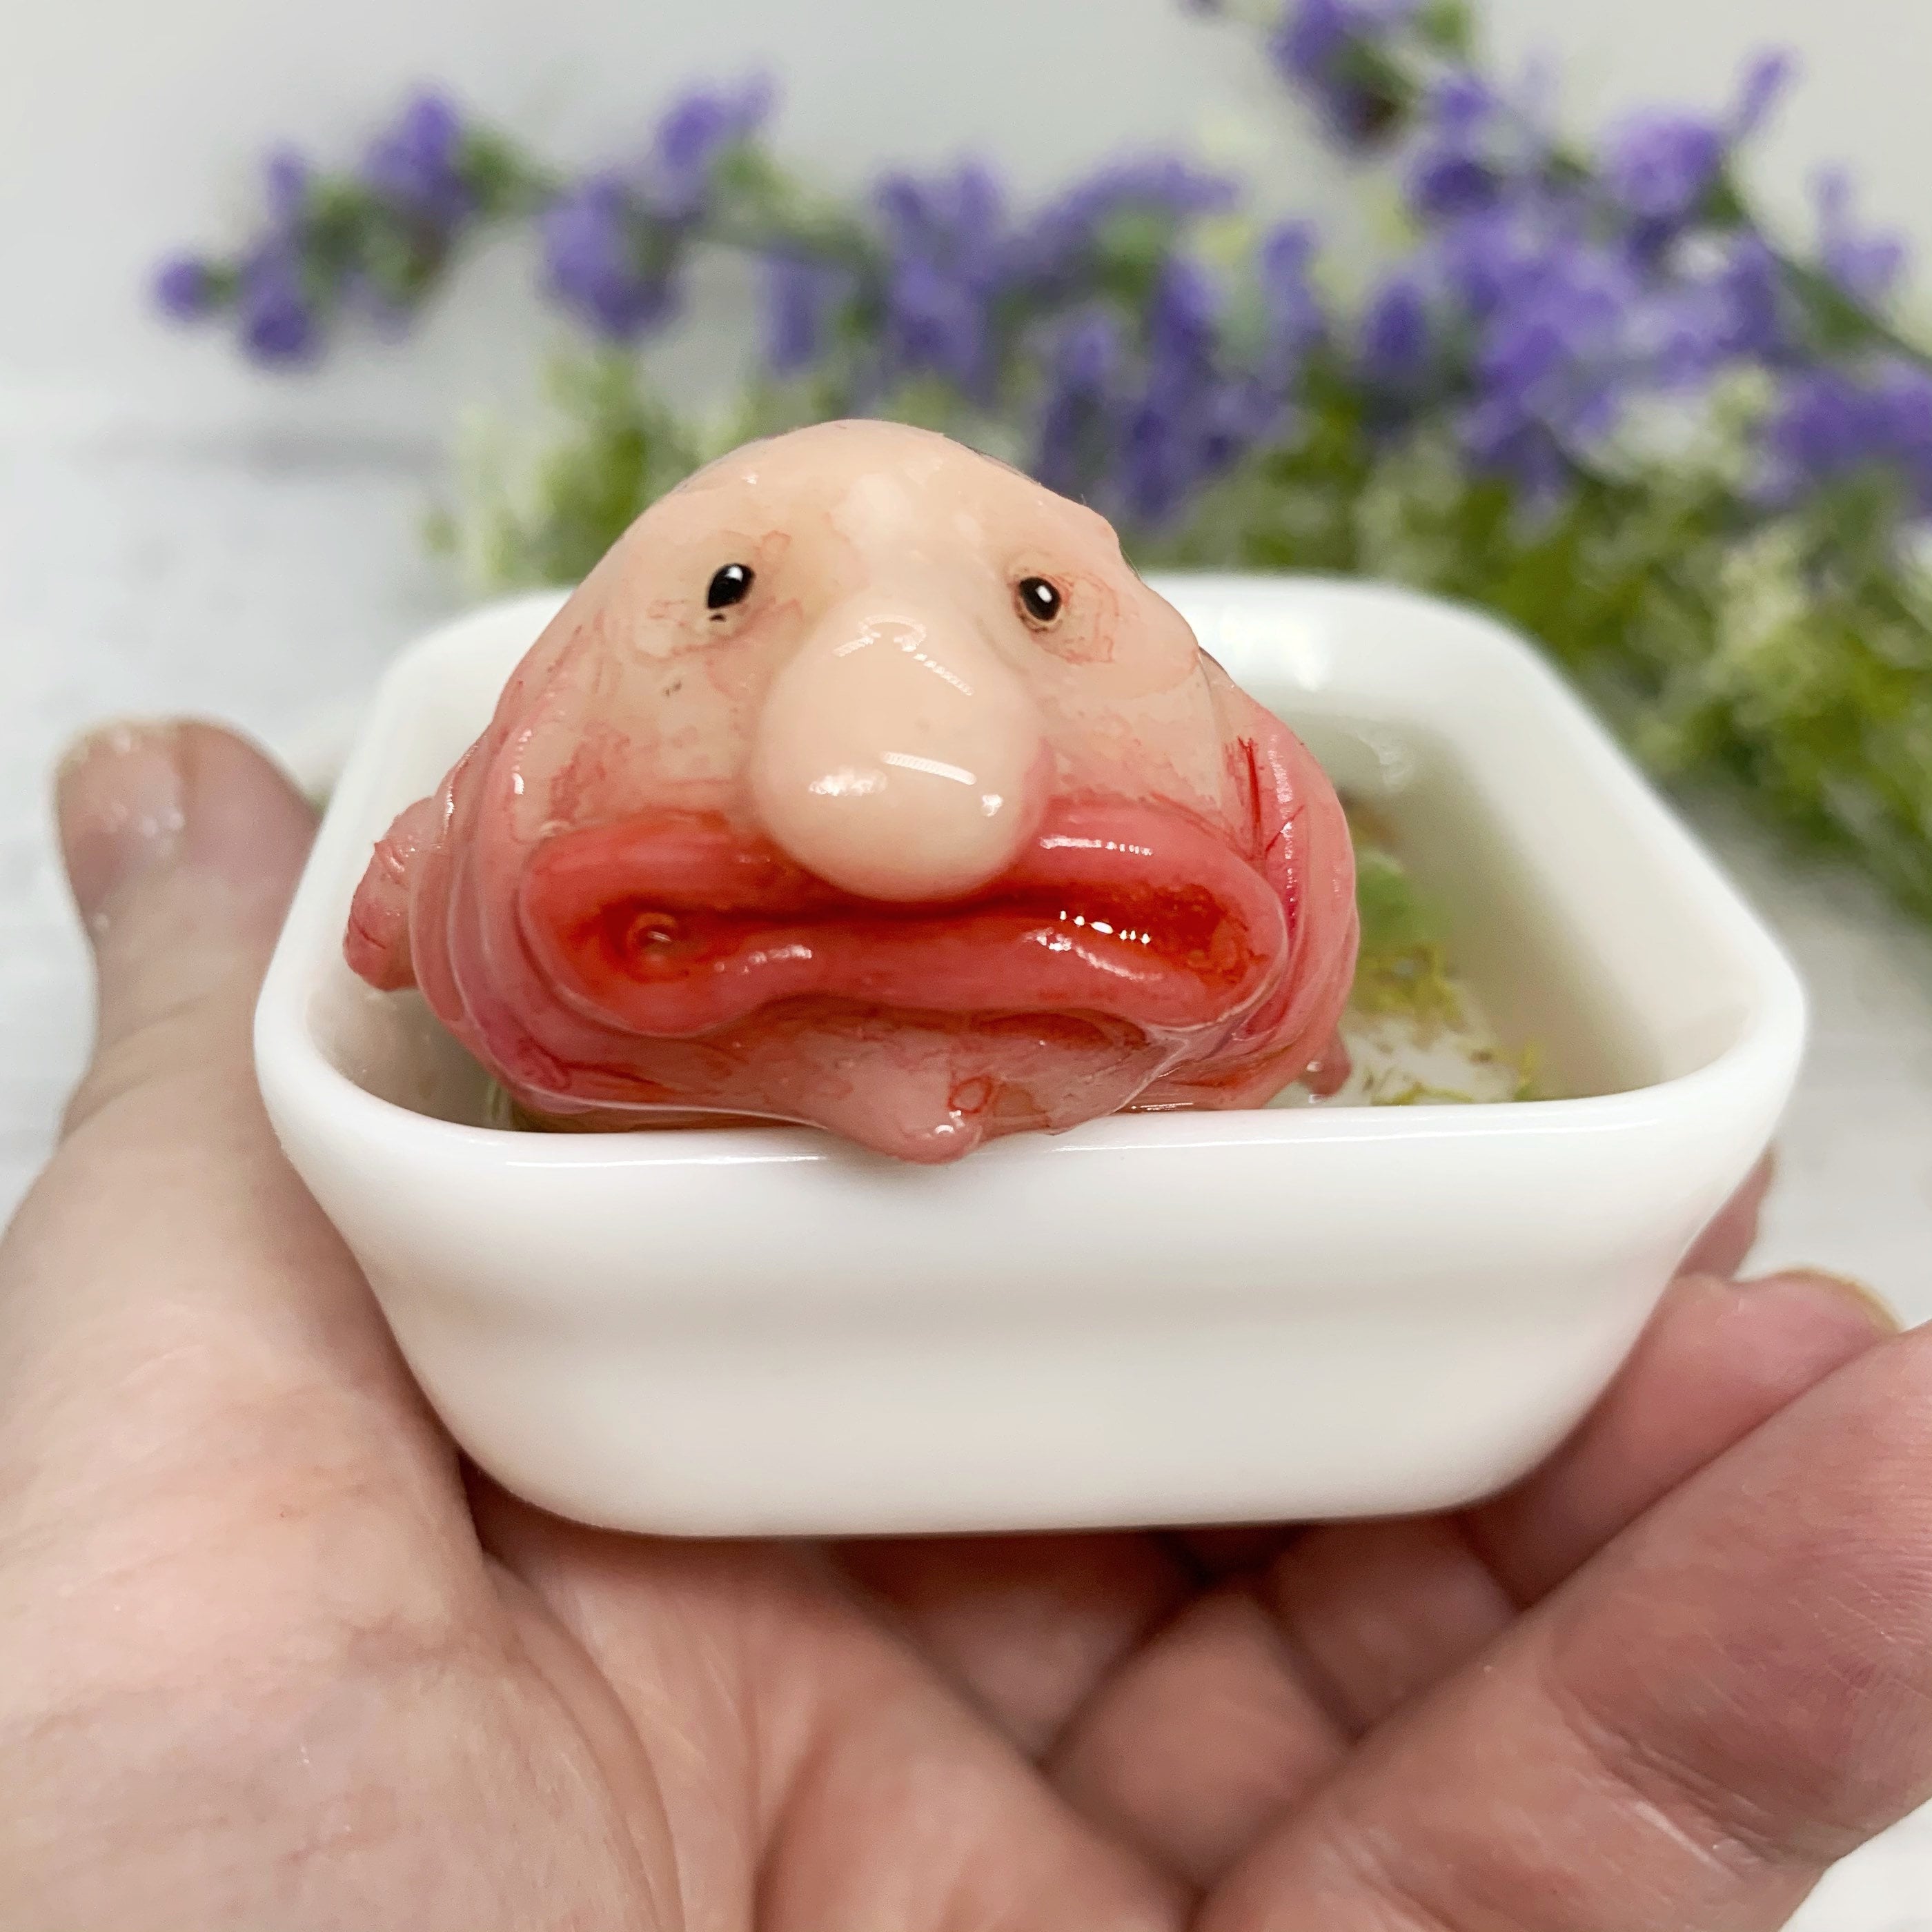 blobfish made out of resin